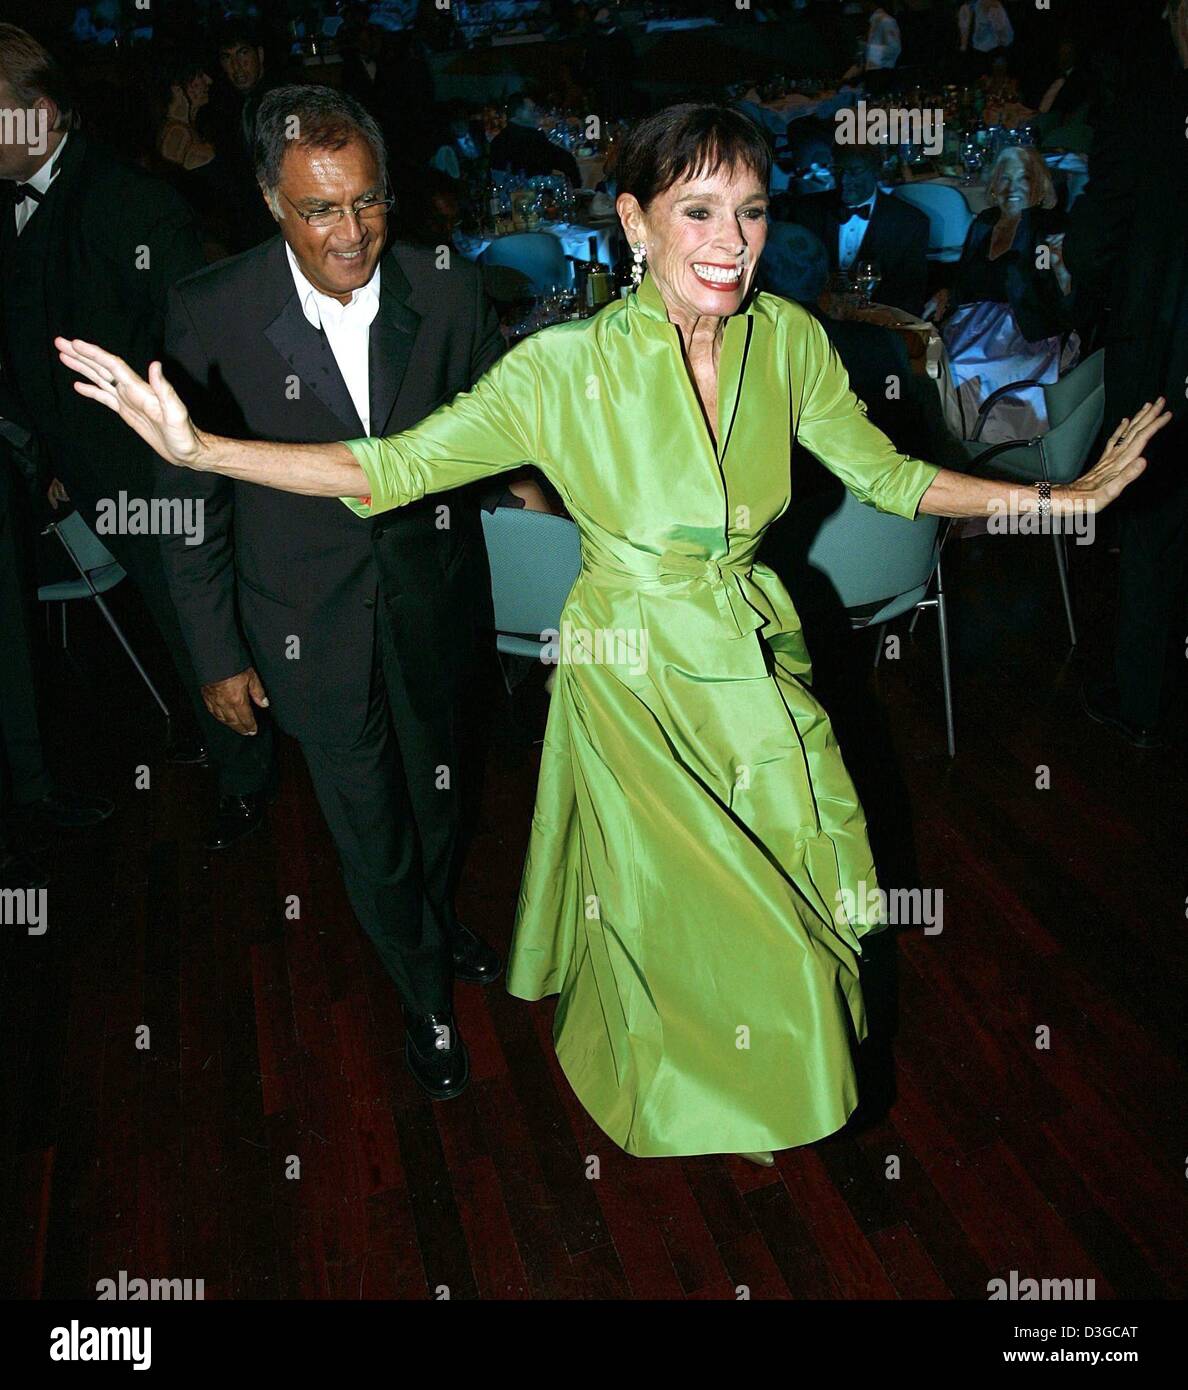 (dpa) - US actress Geraldine Chaplin dances with her longtime companion, Chilean artist Patricio Castilla, at the 'Ball der Sterne' charity event in Mannheim, Germany, 16 October 2004. Over 2,000 guests, among them many international celebrities, attended the 15th charity ball hosted by private German radio station Radio Regenbogen to raise money for charitable causes. The motto of Stock Photo